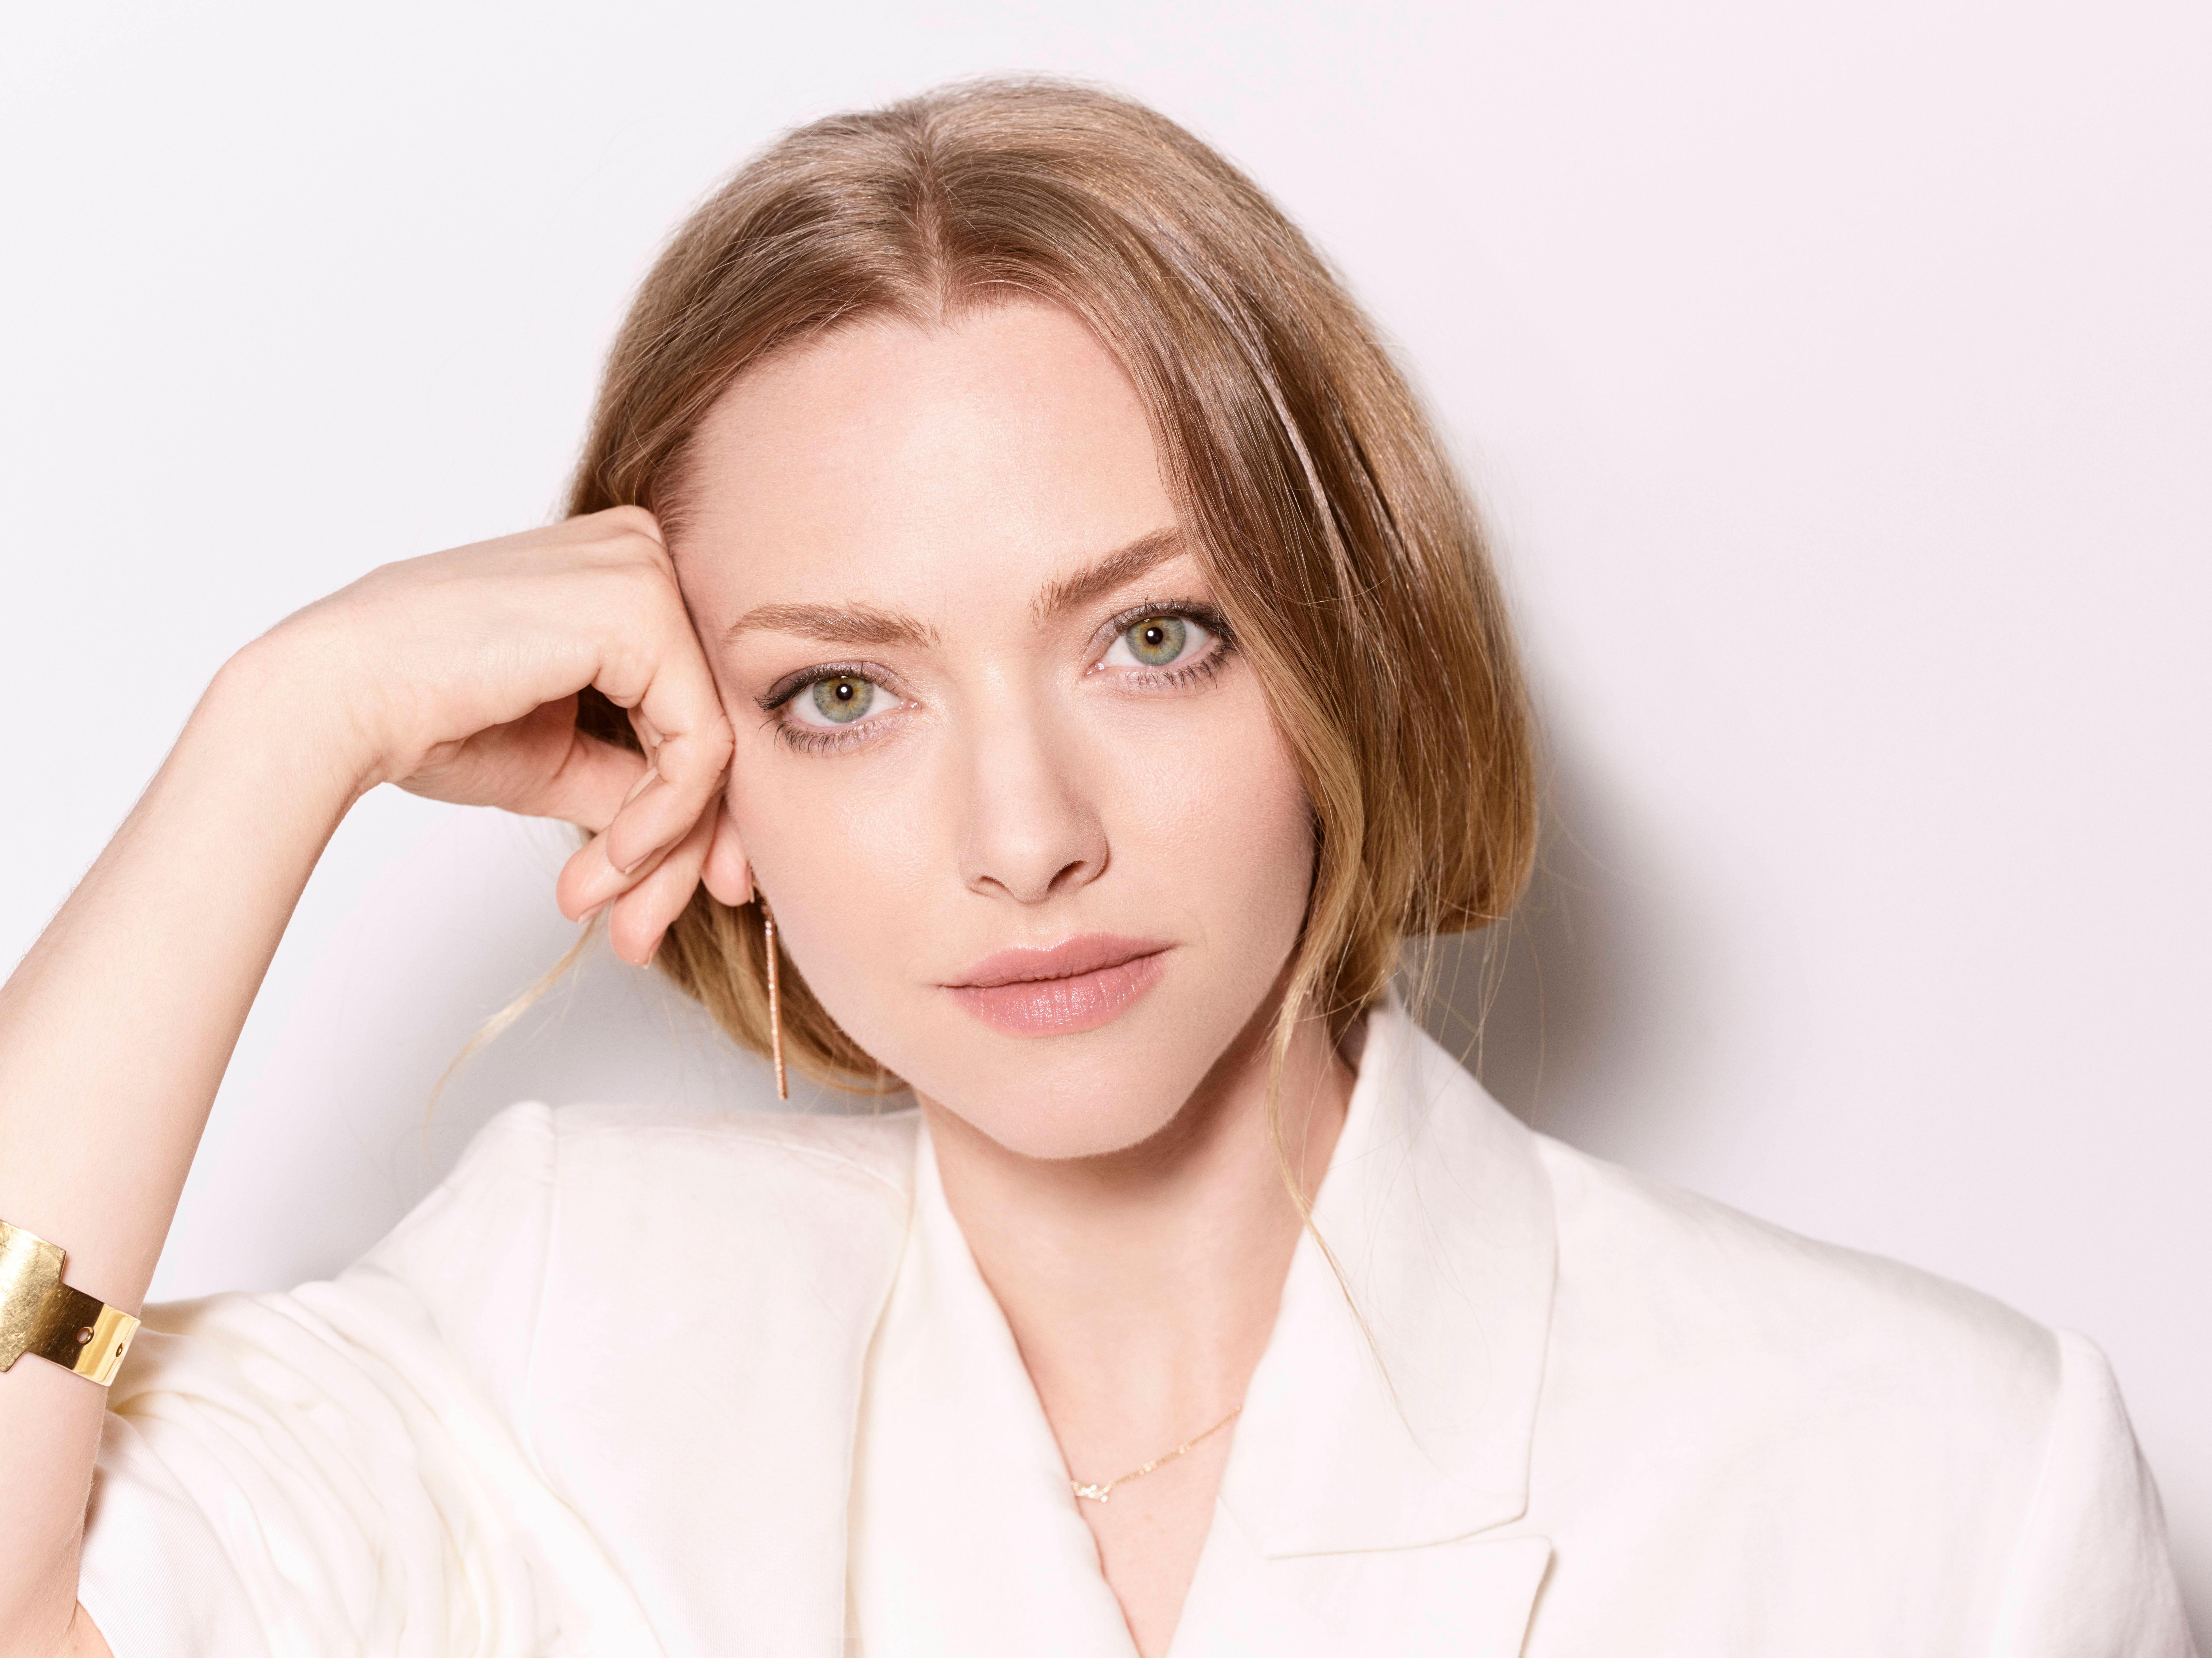 Actress Amanda Seyfried has been unveiled as a new ambassador for beauty brand, Lancome.